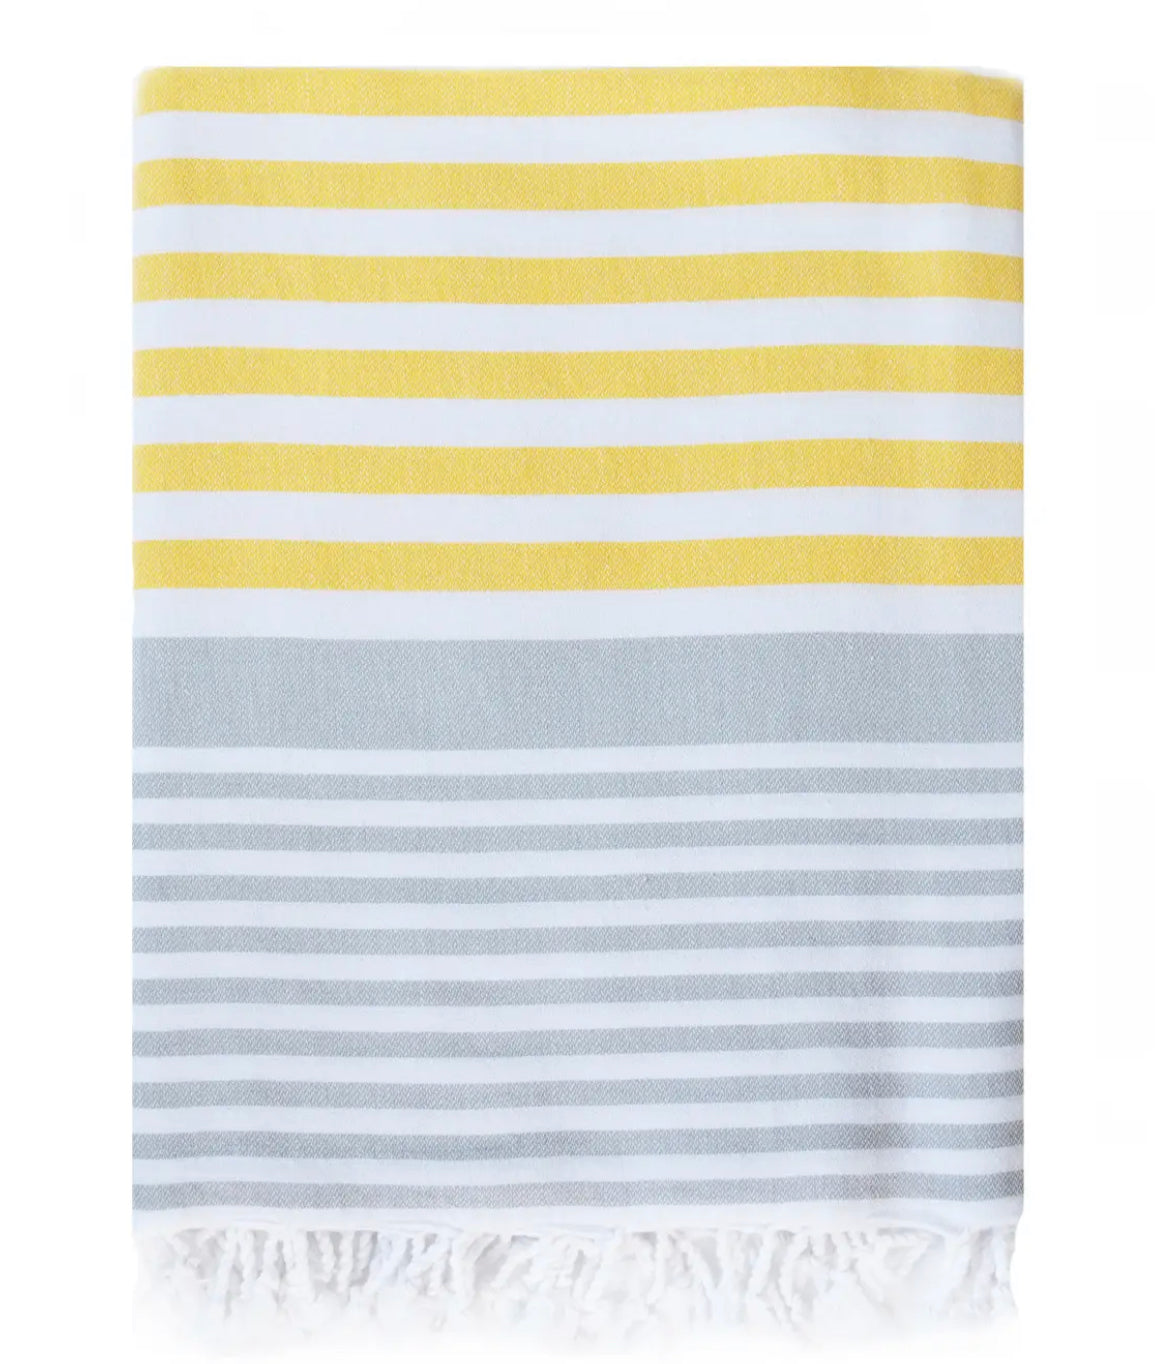 The Lucy Beach Blanket 79”x79” Yellow and Gray